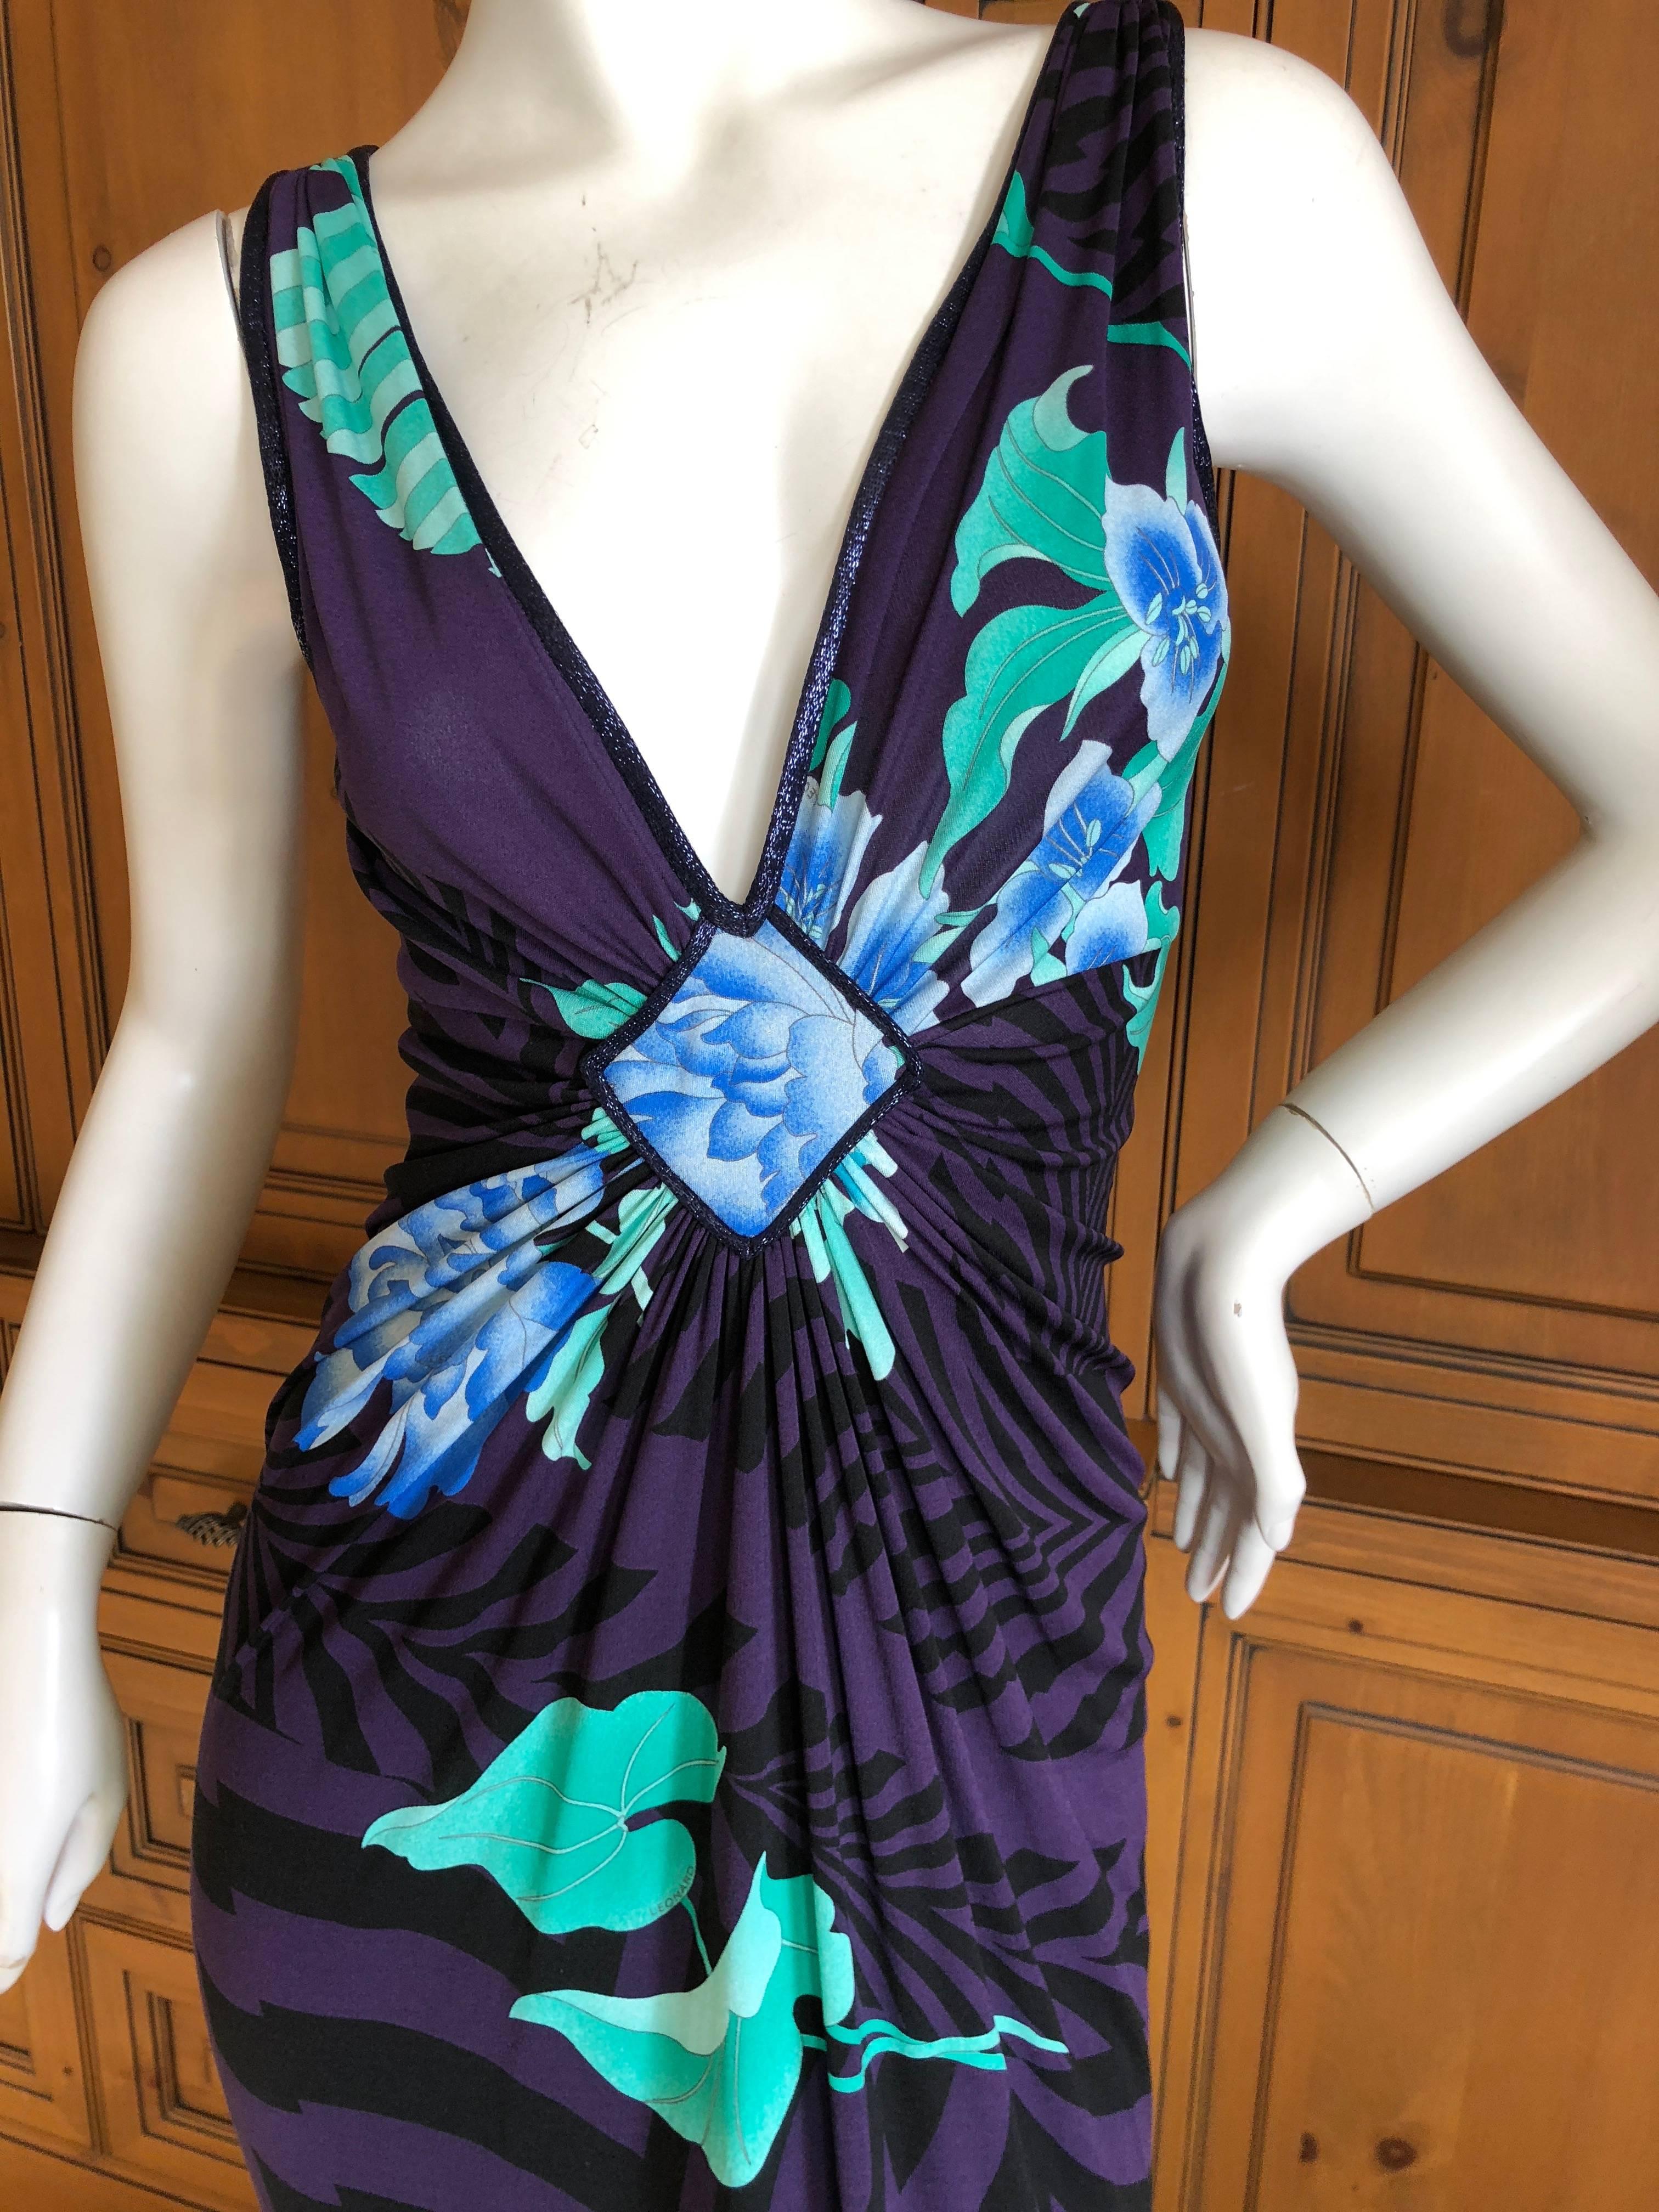 Leonard Paris Silk Jersey Palmetto Leaf Print Dress New with Tags In Excellent Condition For Sale In Cloverdale, CA